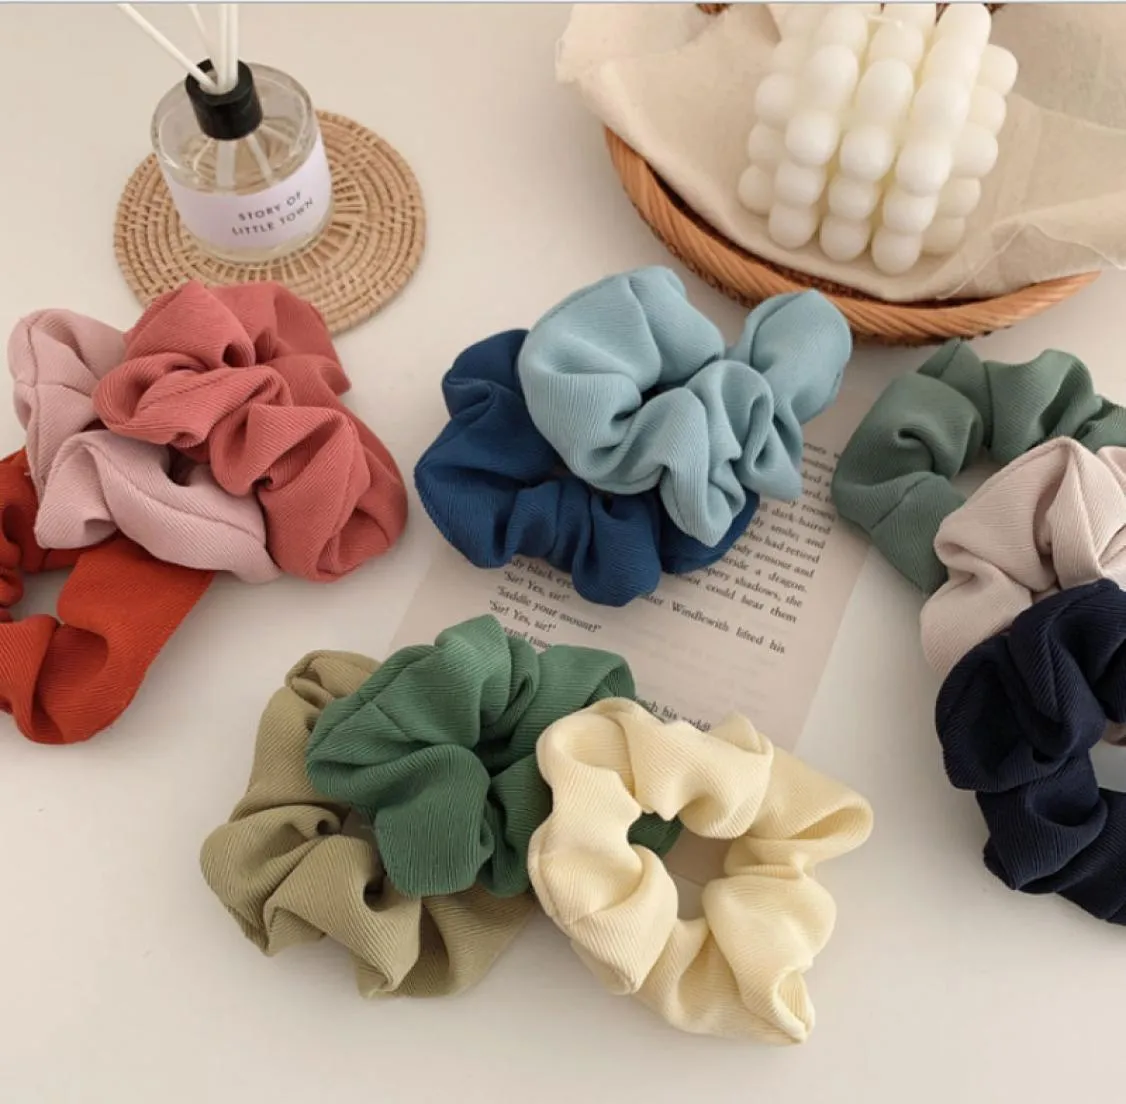 Solid Color Headwear Hair Ties Ropes Elastic Hairbands Children Girls Ponytail Holder Trendy Fashion Accessories8847022